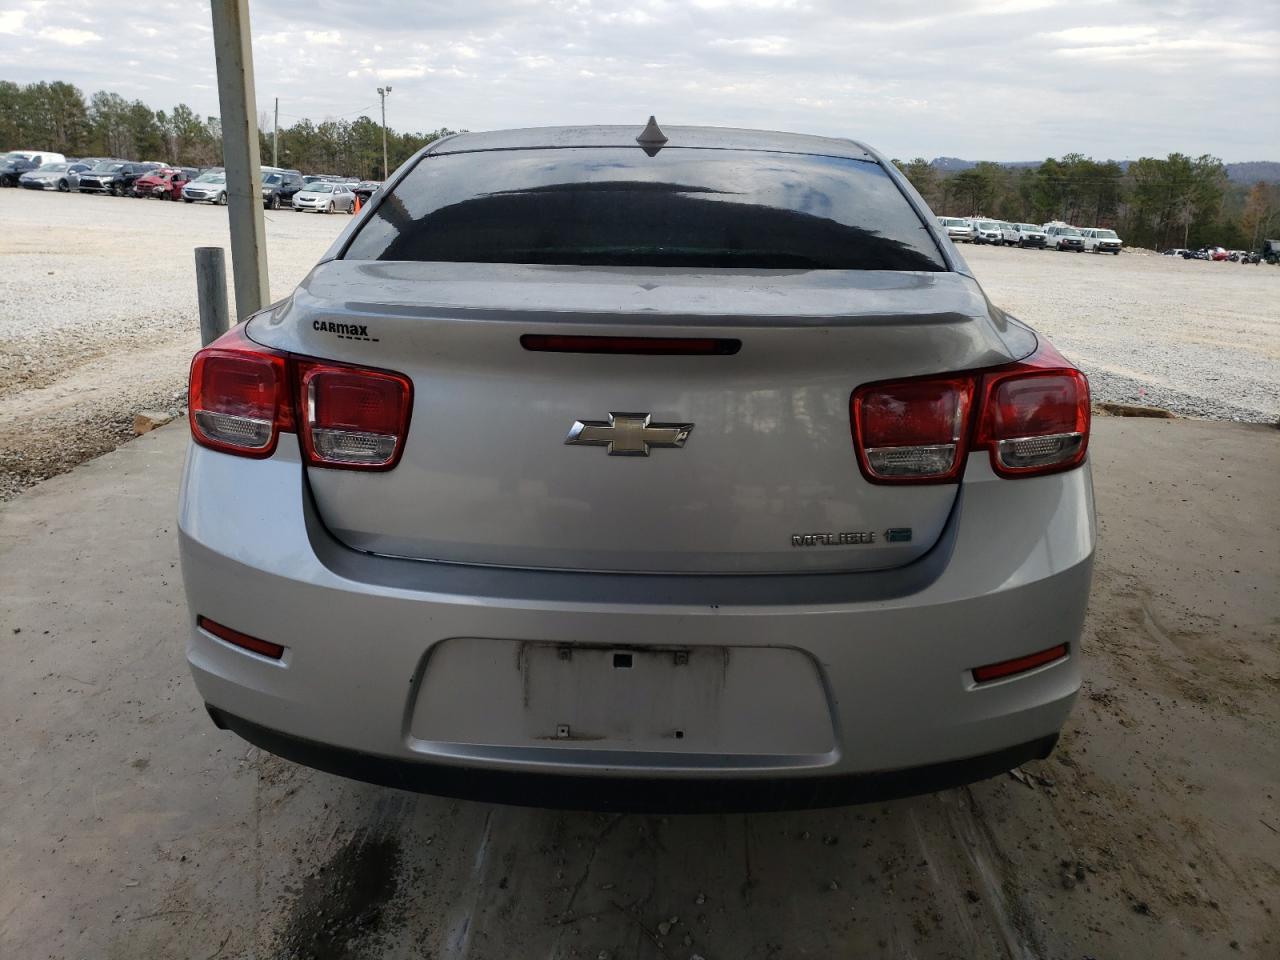 1G11F5RR1DF****** Salvage and Repairable 2013 Chevrolet Malibu in Alabama State